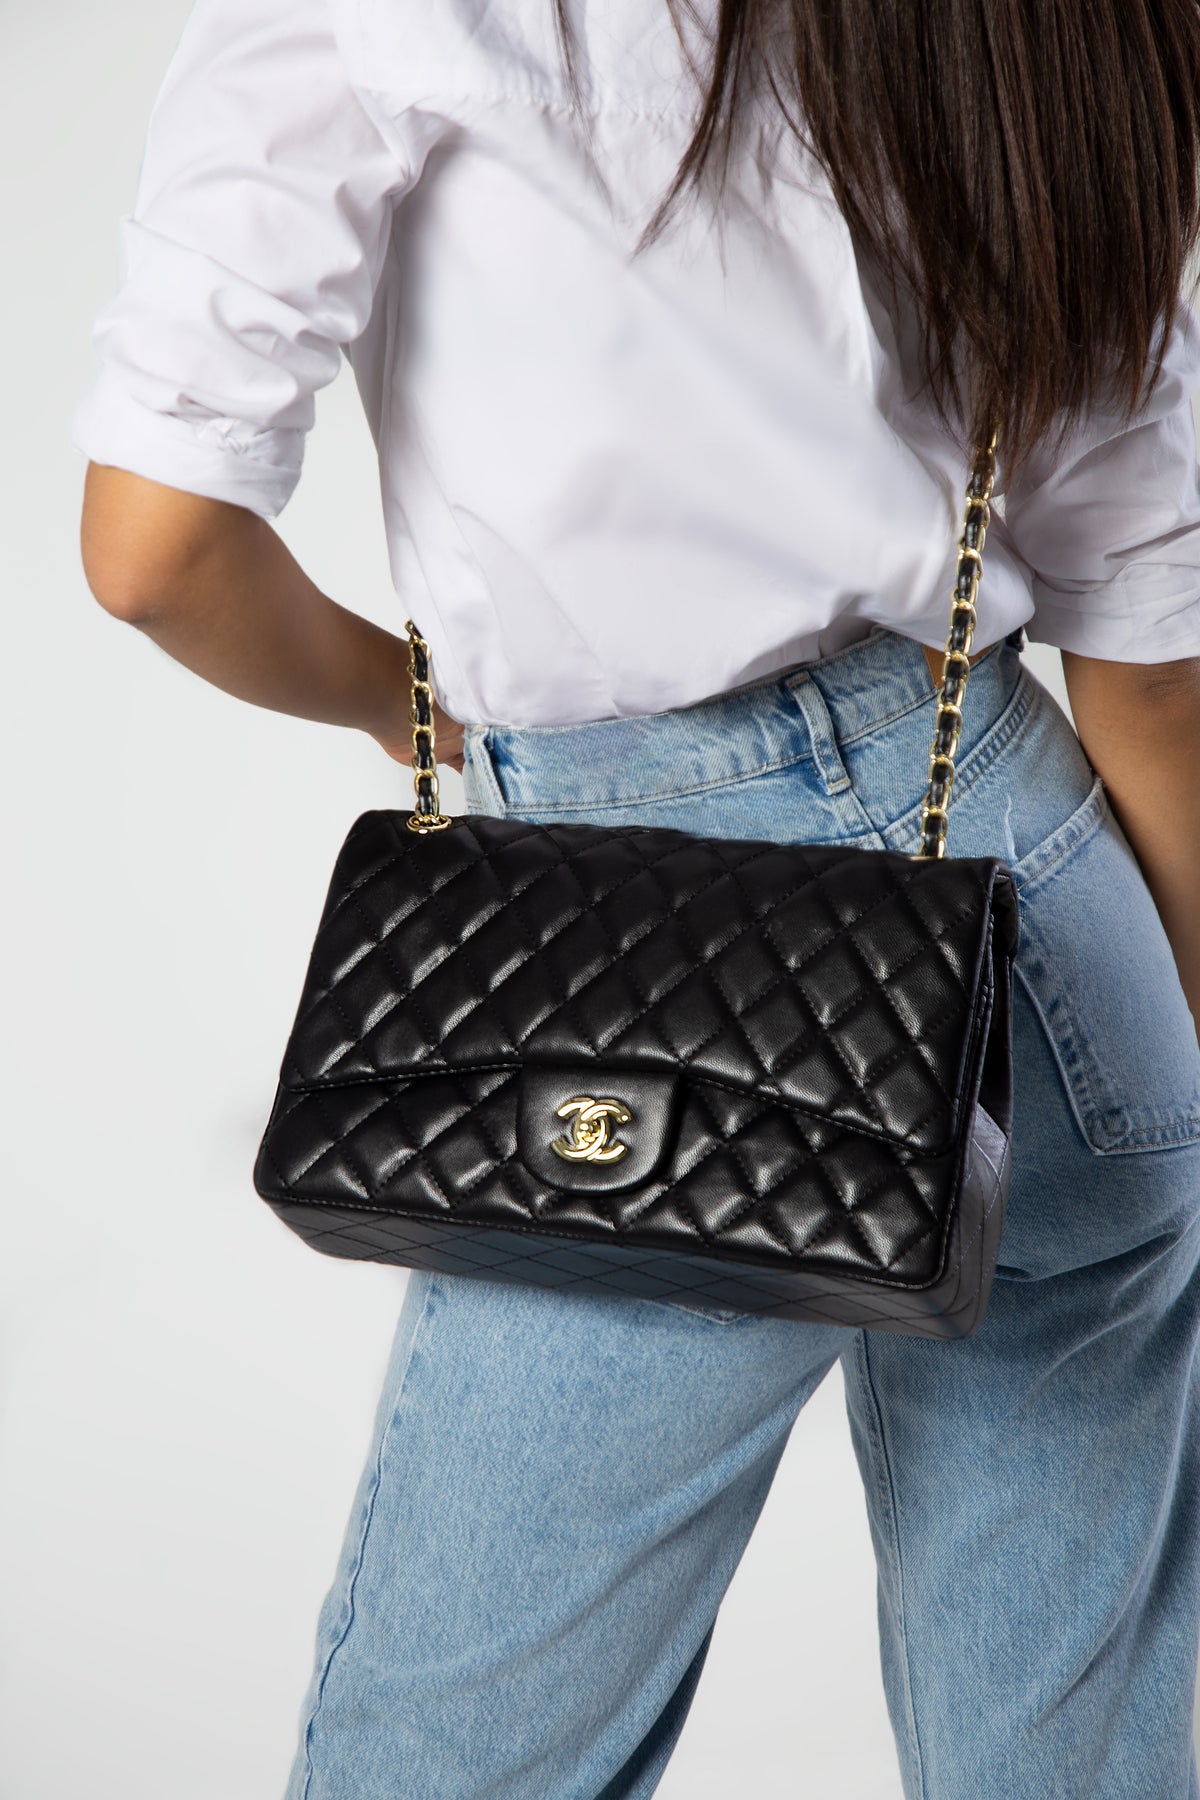 Chanel Iridescent Quilted Leather New Mini Classic Flap Bag Chanel